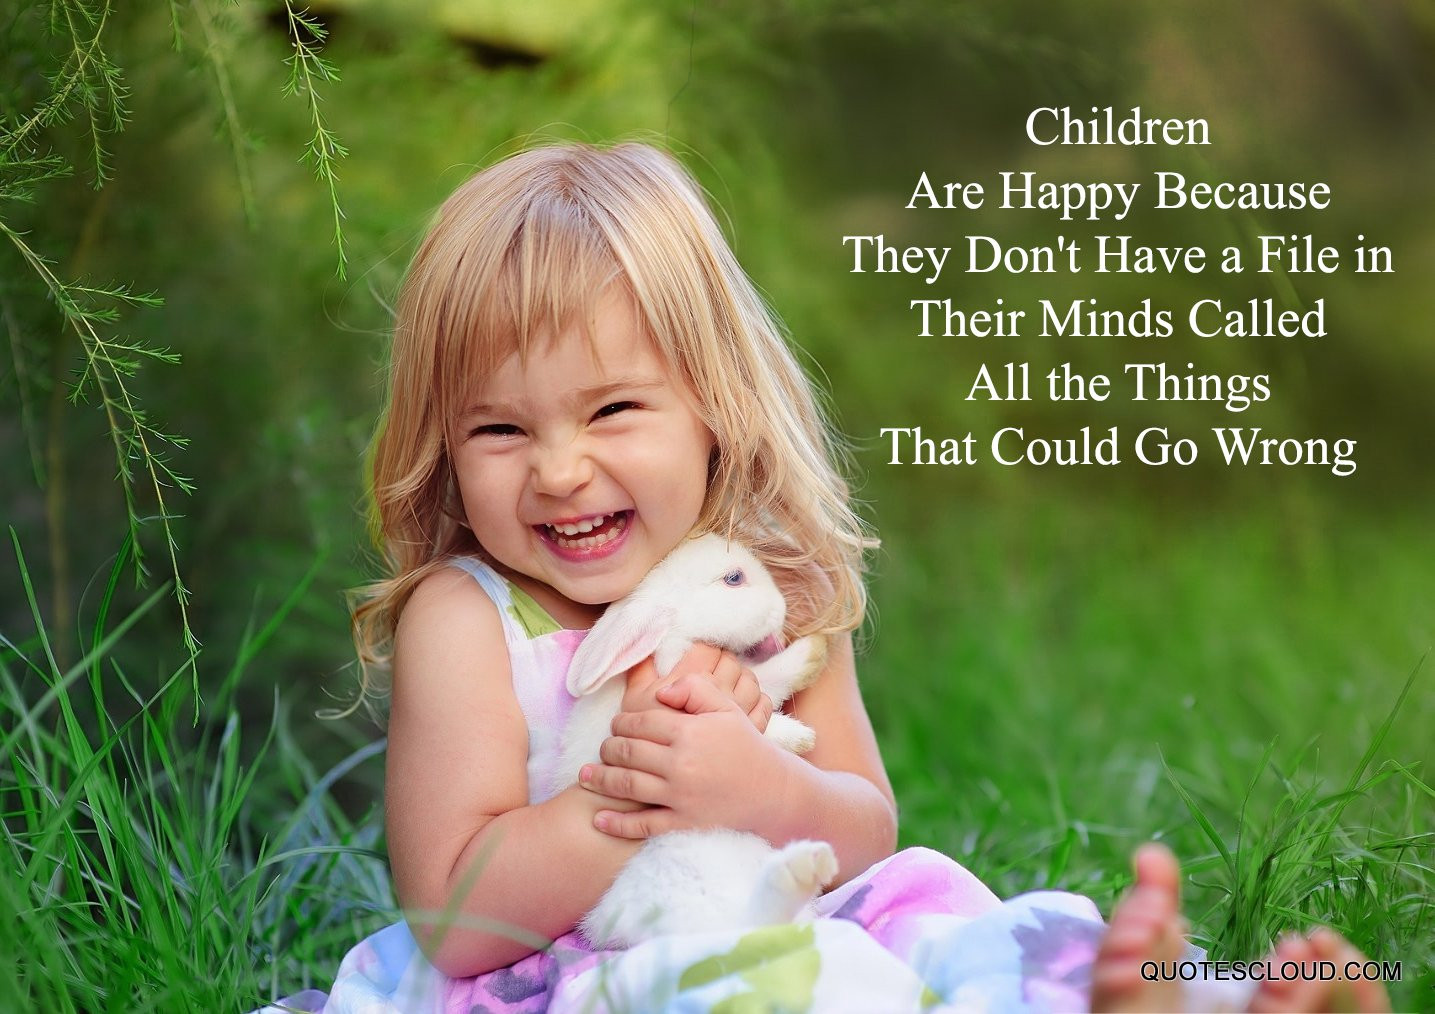 Child Happy Quotes
 Children are happy because they don t have a file in their